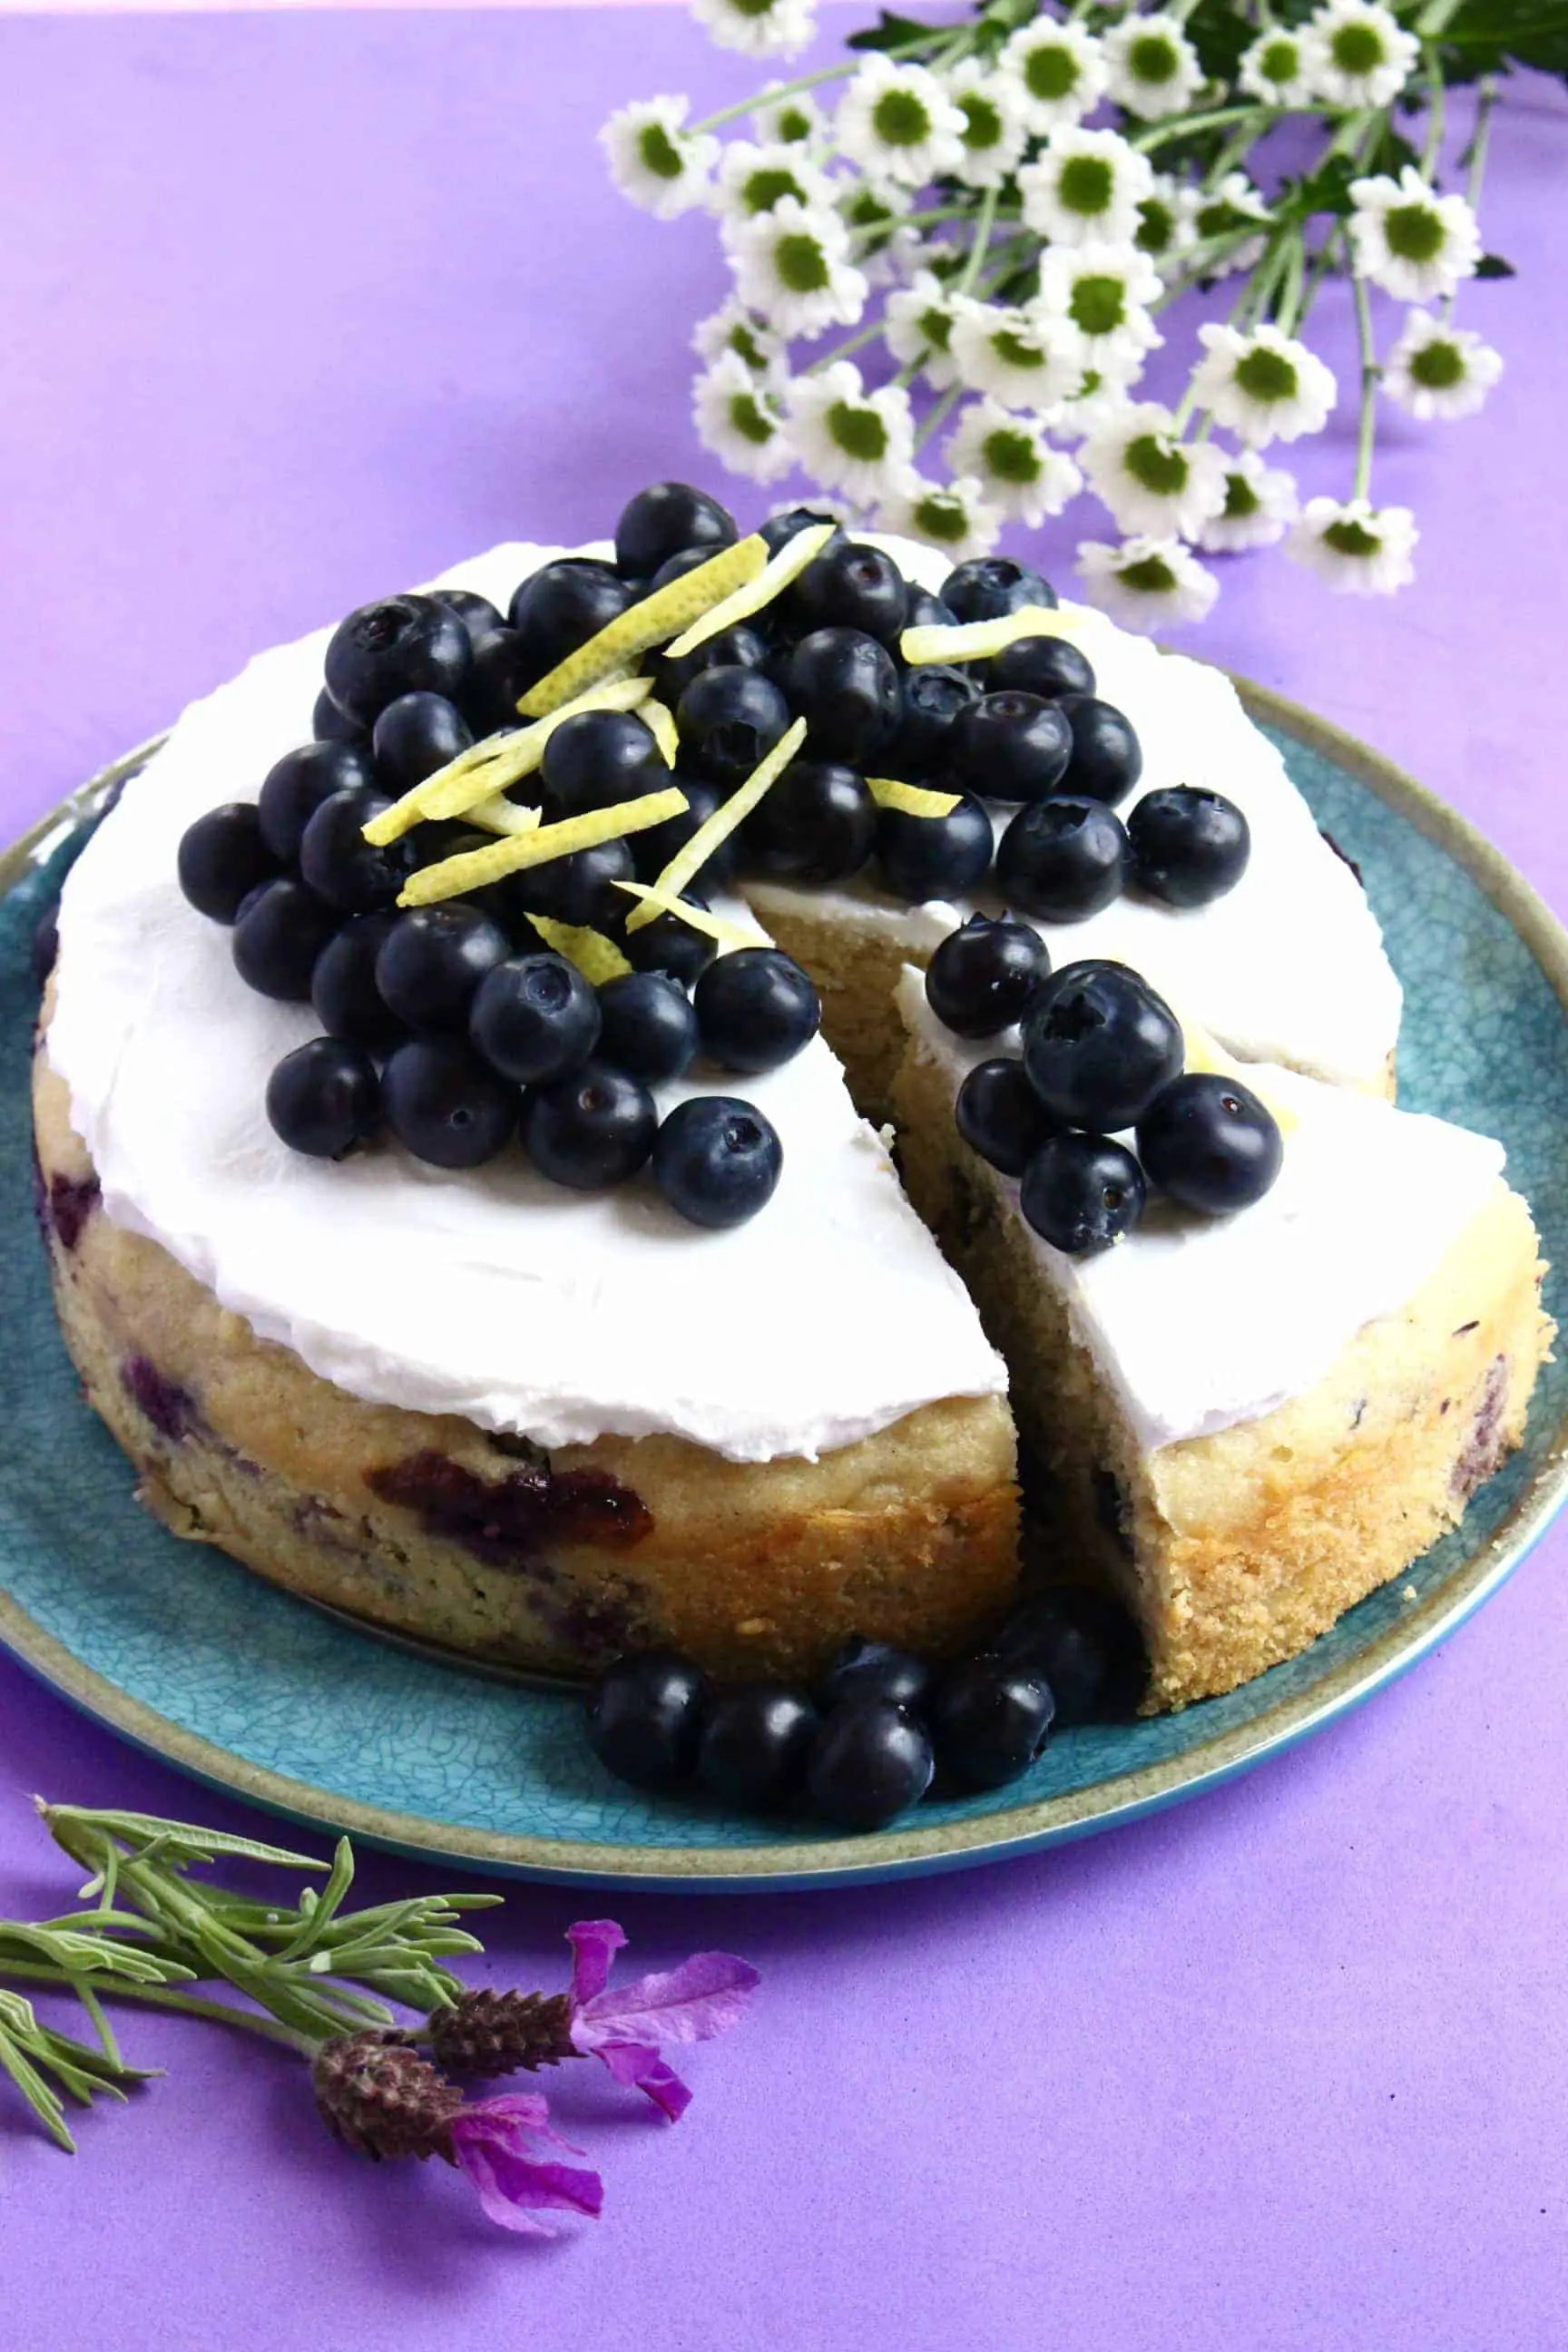 Gluten-free vegan lemon blueberry cake topped with blueberries on a blue plate